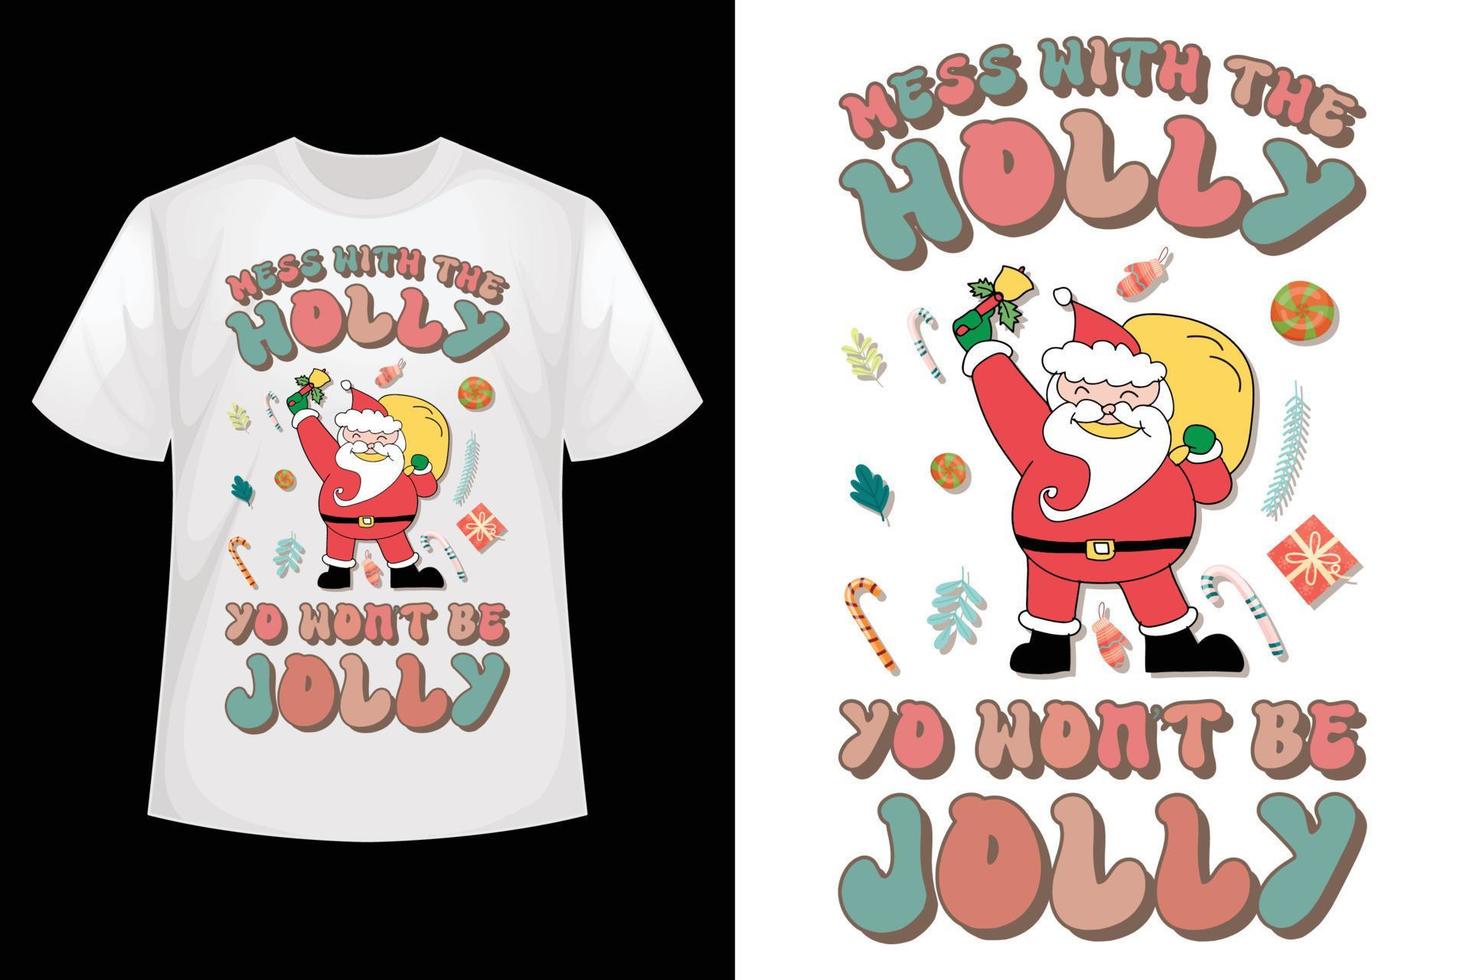 Mess with the Holly yo wont be Jolly - Christmas t-shirt design template vector